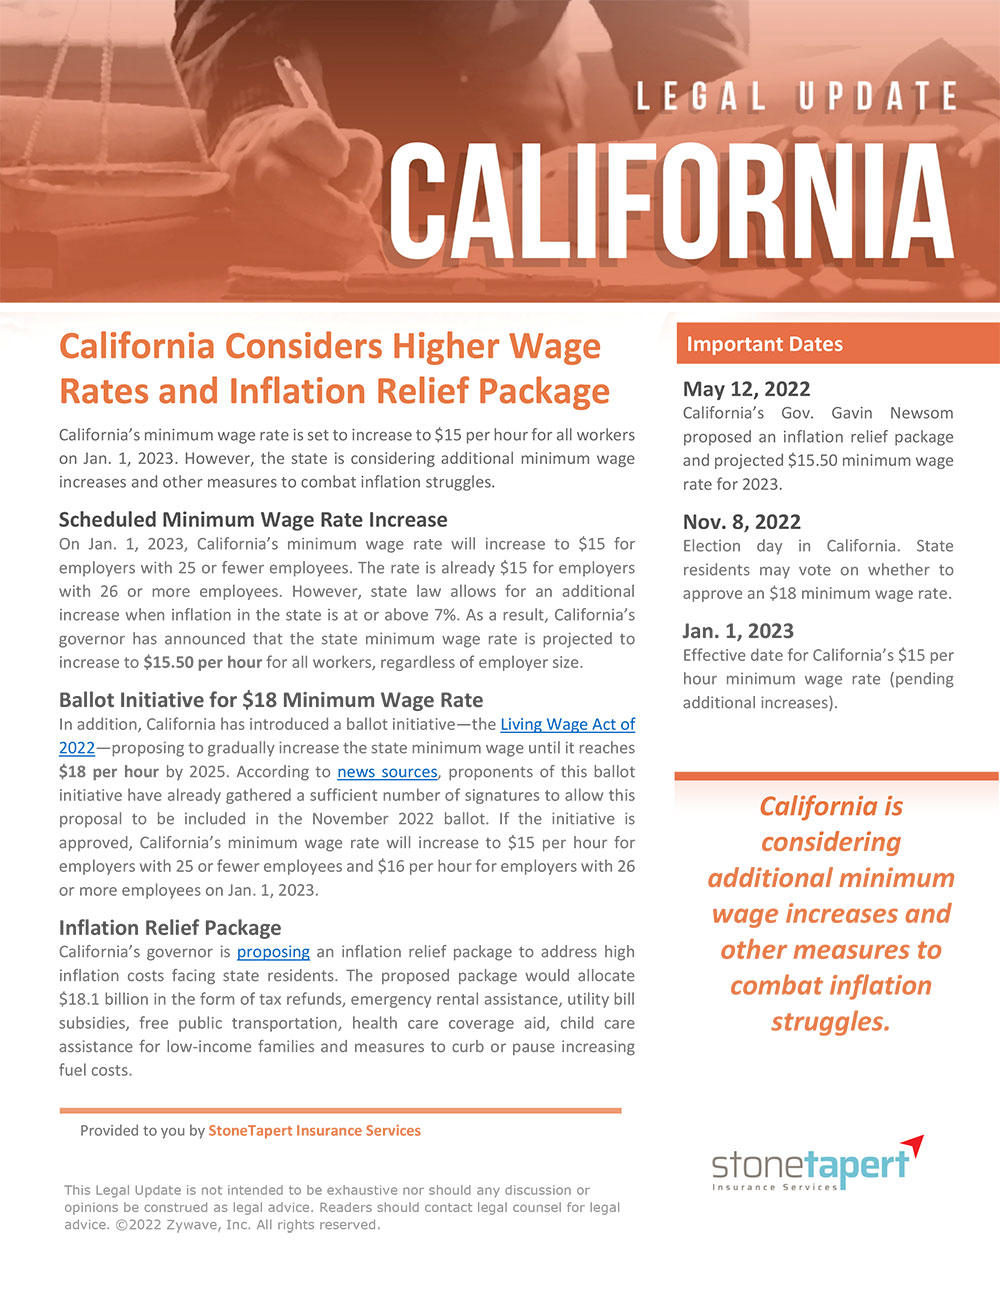 California Proposes Higher Wage Rate and Inflation Relief Package